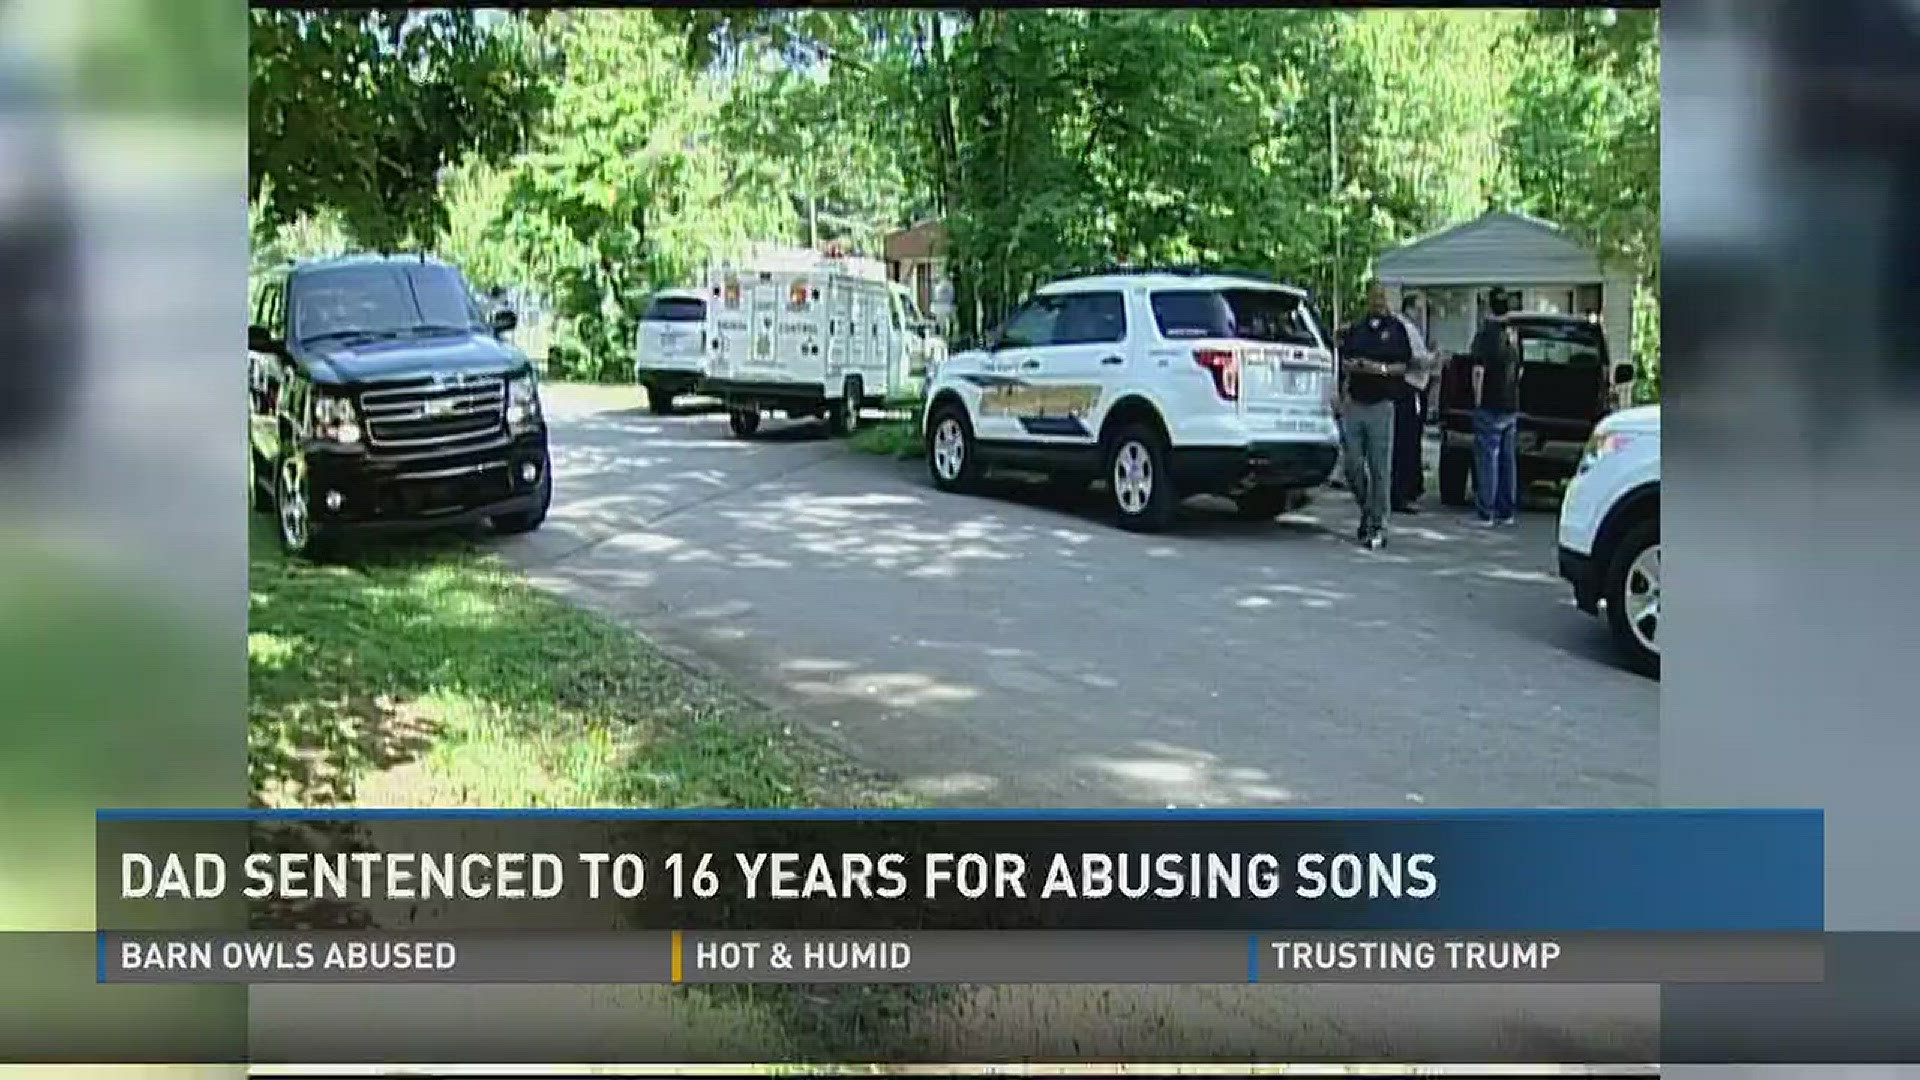 June 29, 2017: A West Knox County father found guilty of abusing his sons will spend 16 years behind bars.